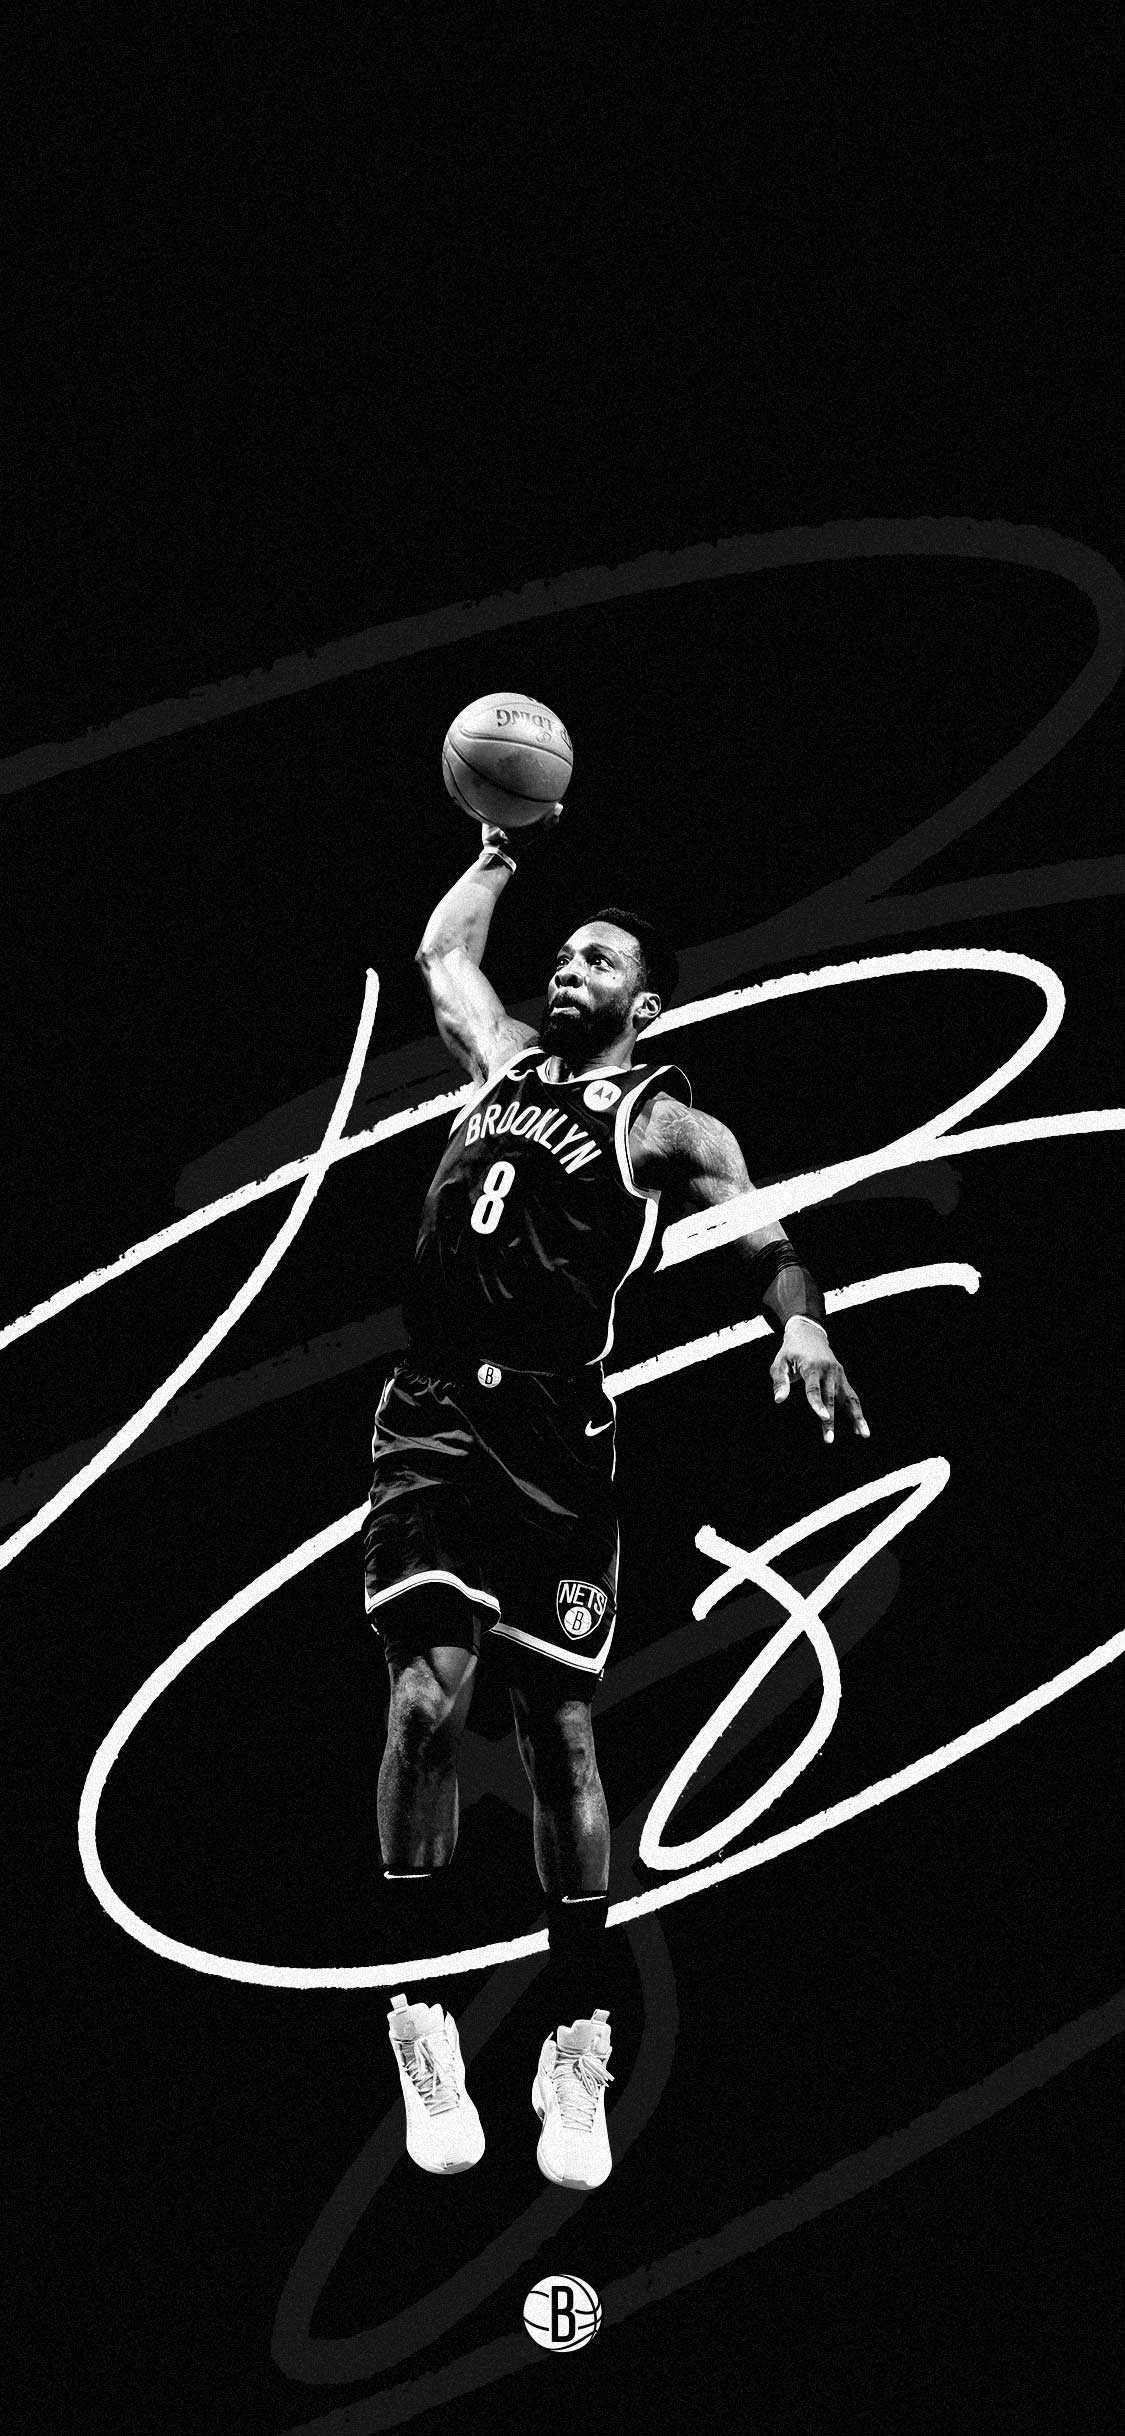 Download Free Basketball iPhone Wallpaper  Basketball iphone wallpaper Basketball  wallpaper Basketball wallpapers hd